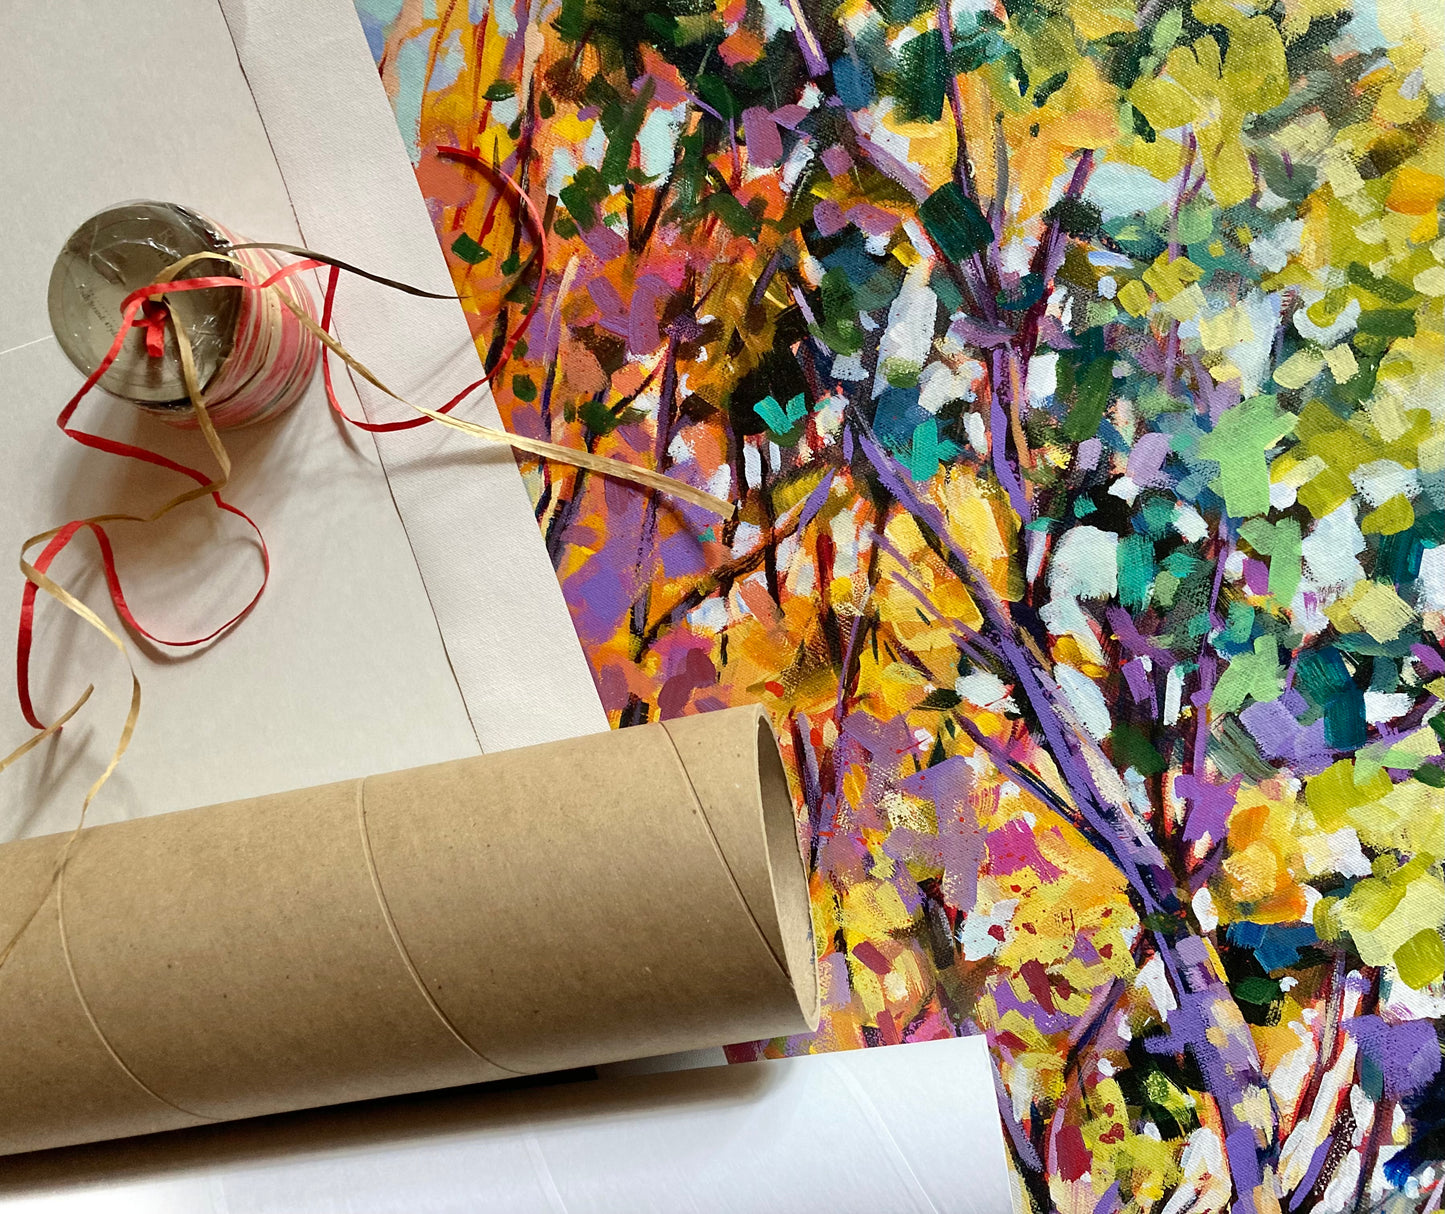 canvas giclee print and packaging materials